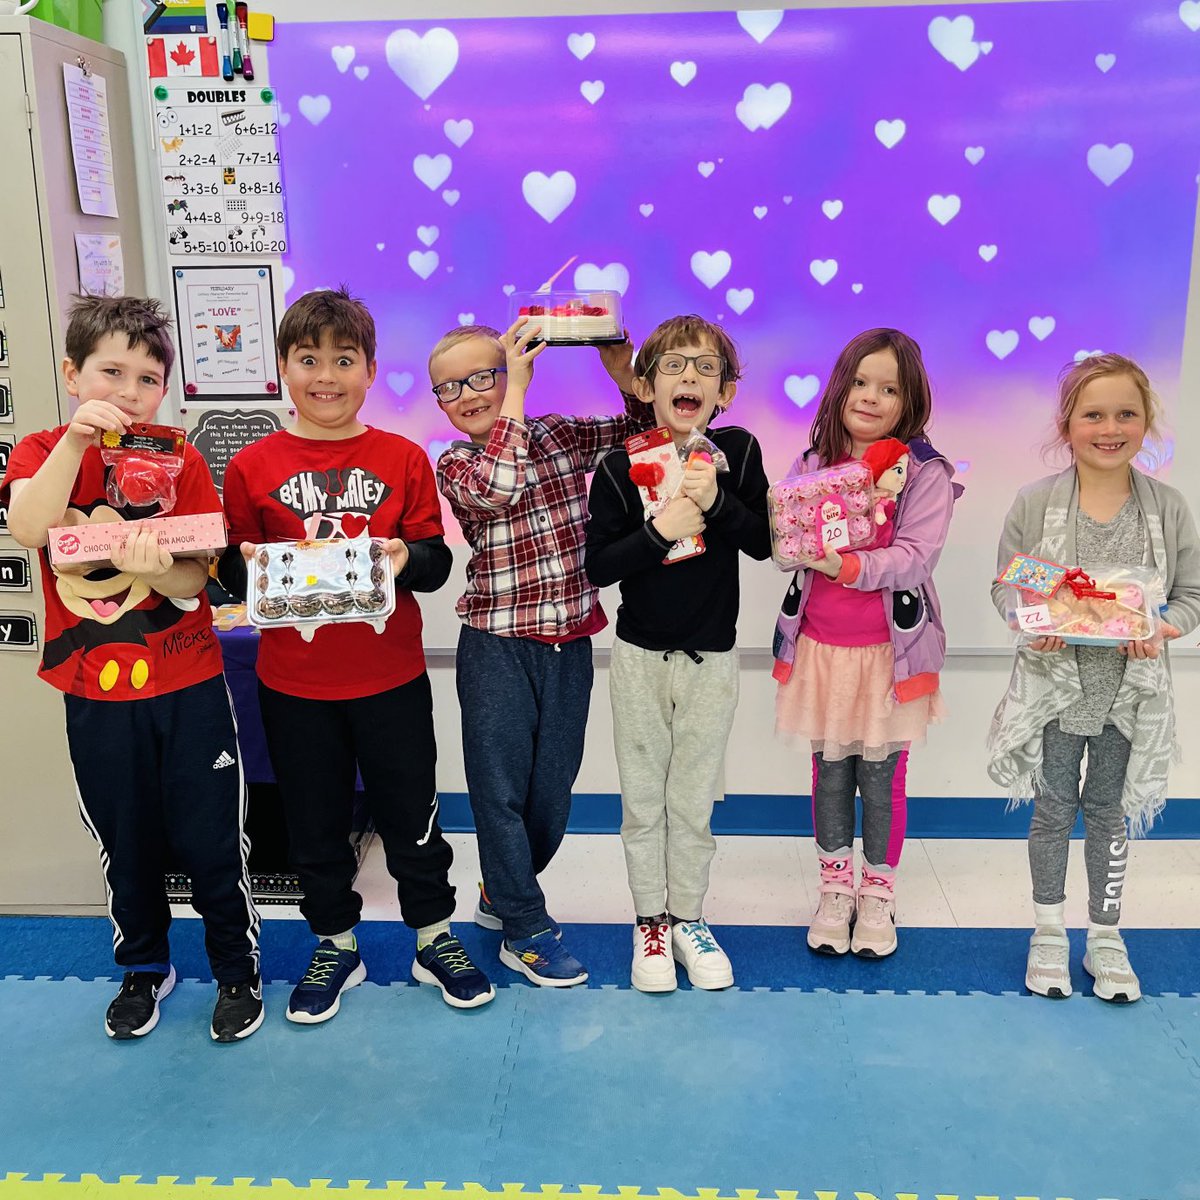 A big thank you to ⁦@stannecouncil⁩ for putting on the Happy Hearts Raffle! 🩷❤️💜 Just look at the smiles it brought to the faces of these students! ⁦⁦@StAnneOCSB⁩ #HappyHearts #ValentinesDay #ocsbJoy